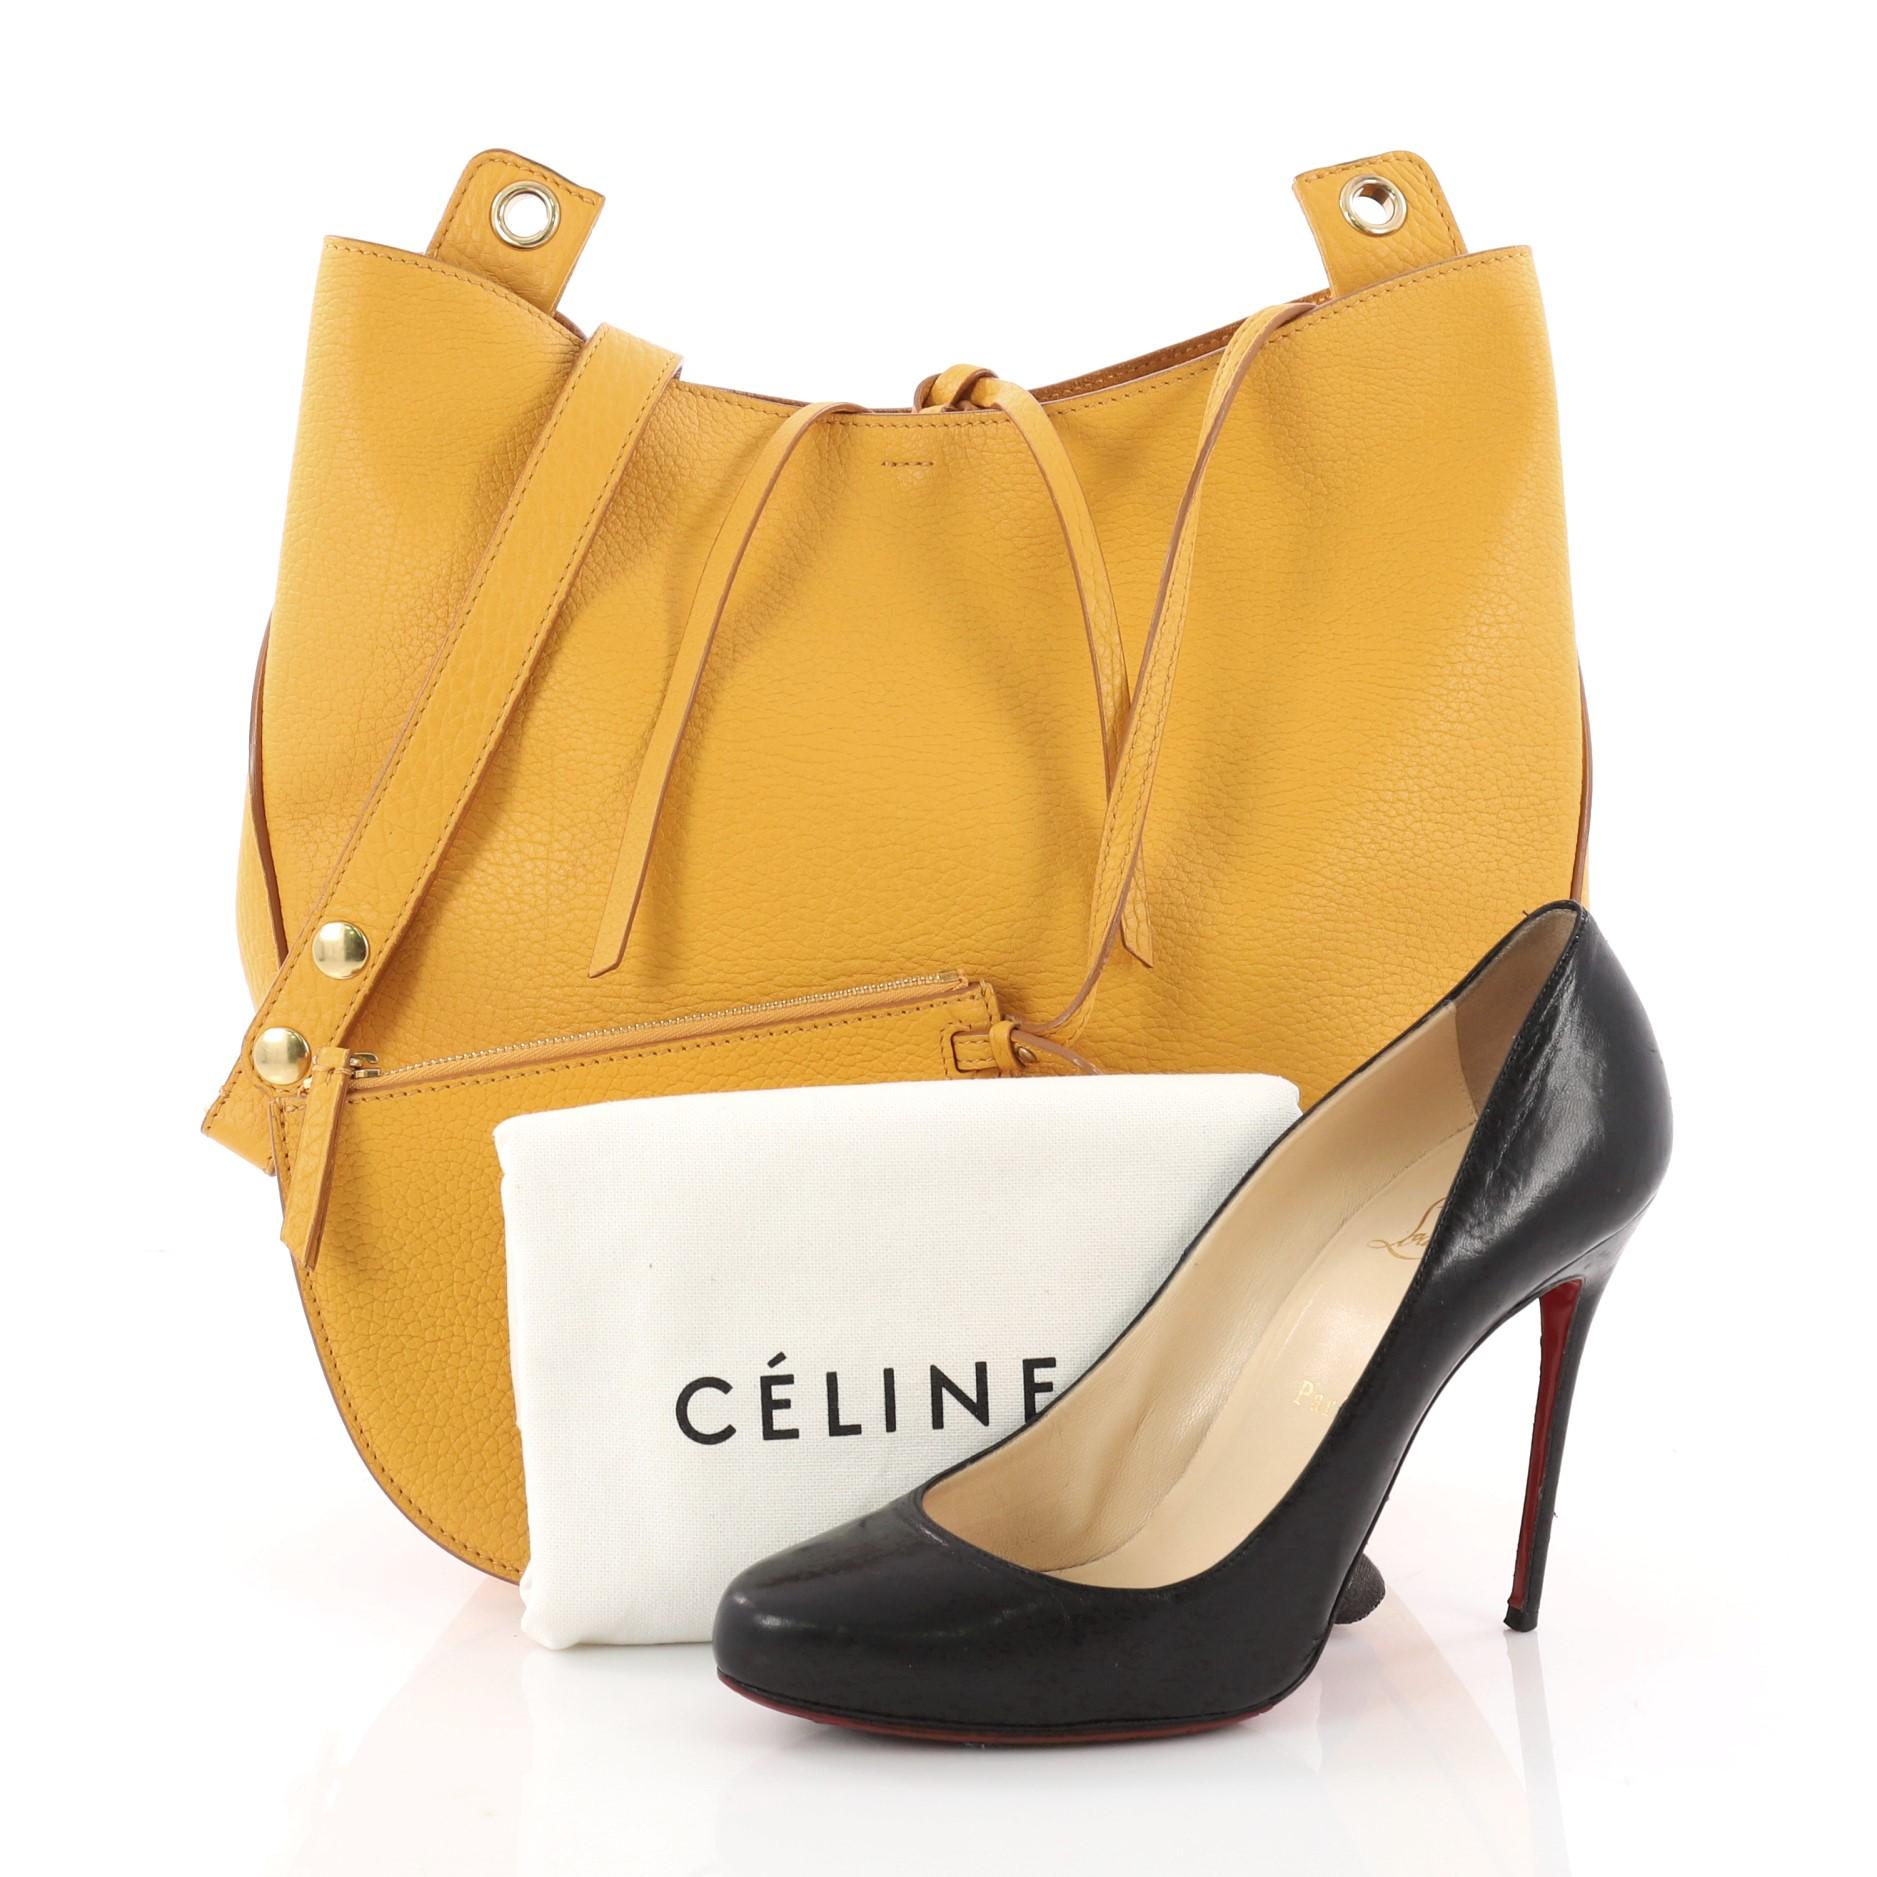 This authentic Celine Hobo Leather Medium mixes simple style with luxurious craftsmanship. Crafted from supple yellow leather, this modern hobo features a single adjustable shoulder strap, stamped Celine logo, and gold-tone hardware accent. Its top